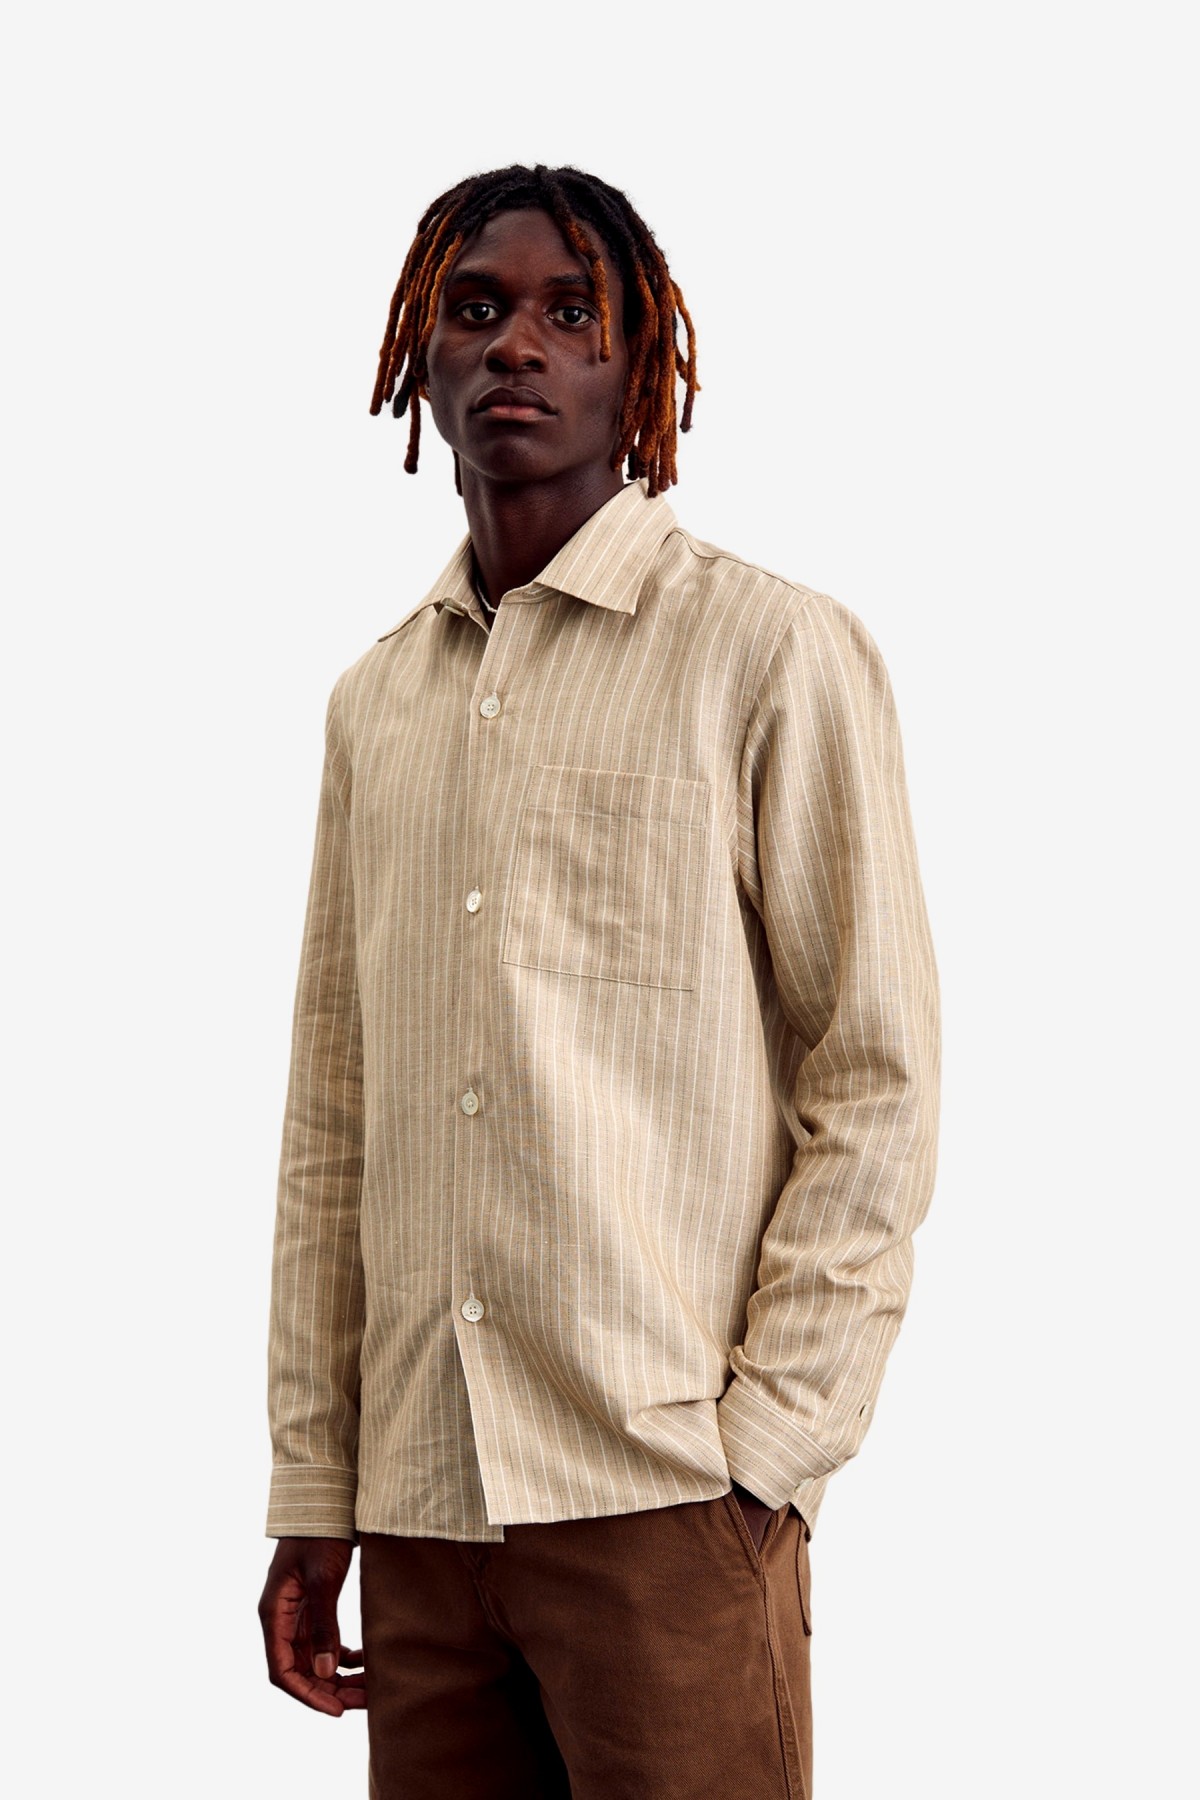 Another Aspect Shirt 4.0 in Brown White Stripe